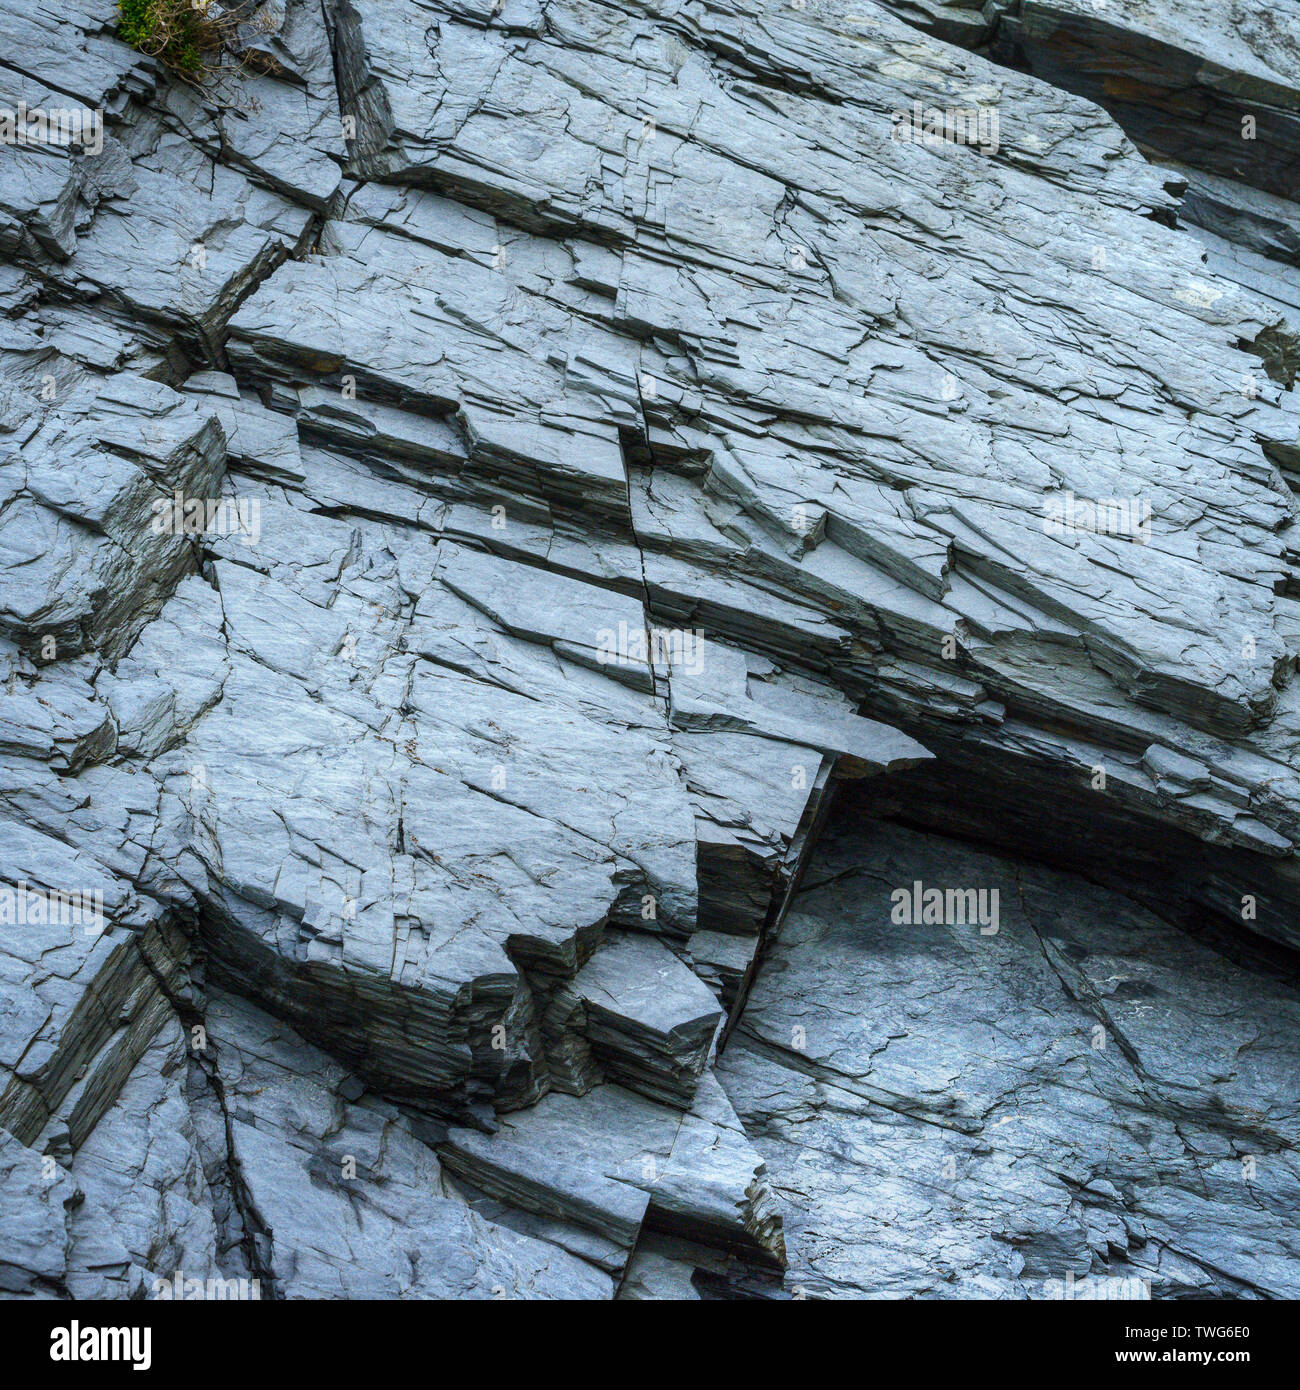 Angled texture in a slate rock, typical of marine cliffs with frequent landslides Stock Photo